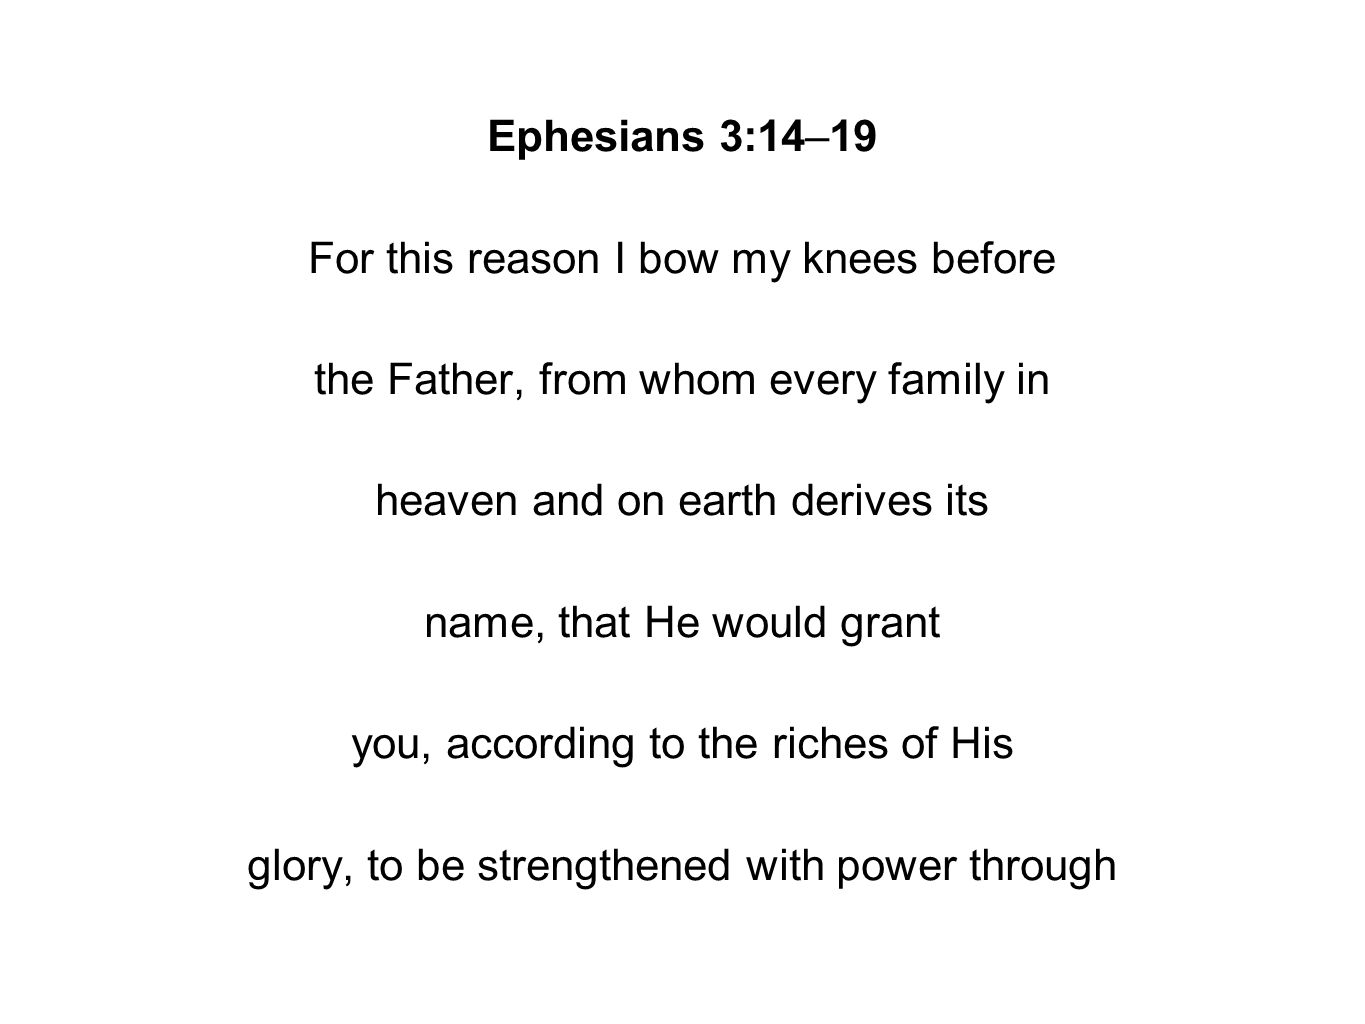 Ephesians 3:14–19 For this reason I bow my knees before the Father, from whom every family in heaven and on earth derives its name, that He would grant you, according to the riches of His glory, to be strengthened with power through